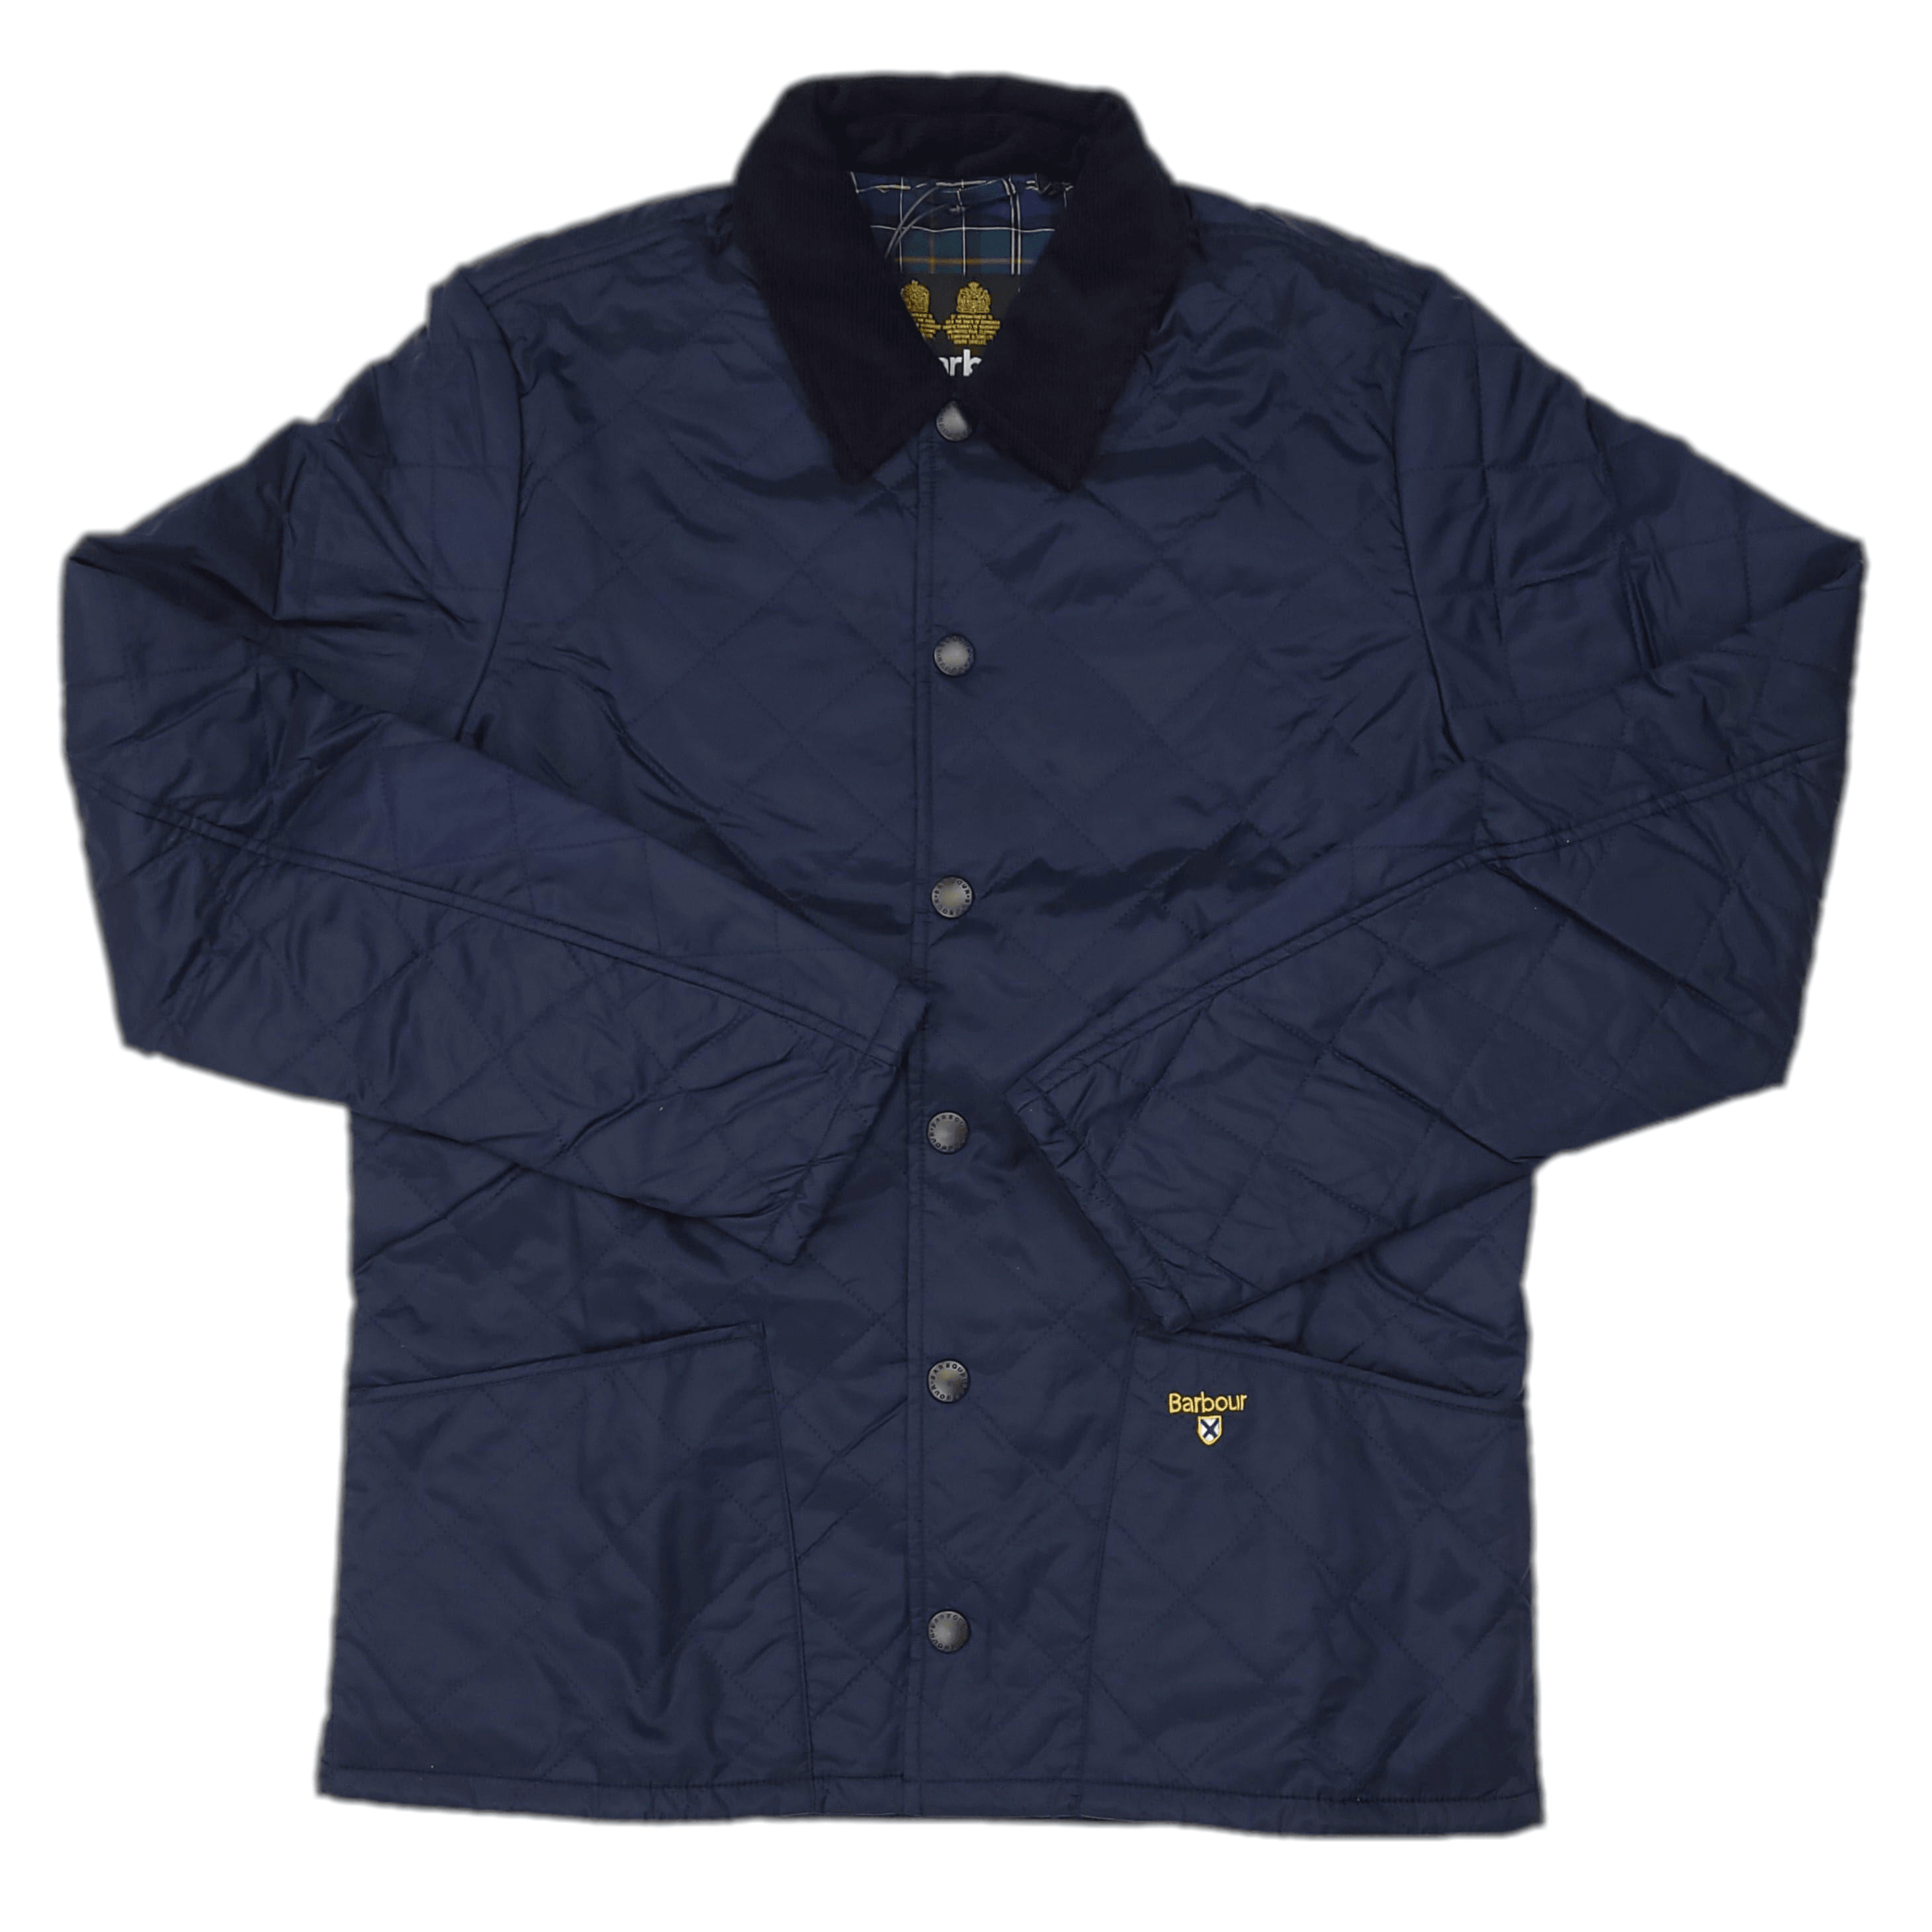 Laflamme- Veste quilted - Barbour